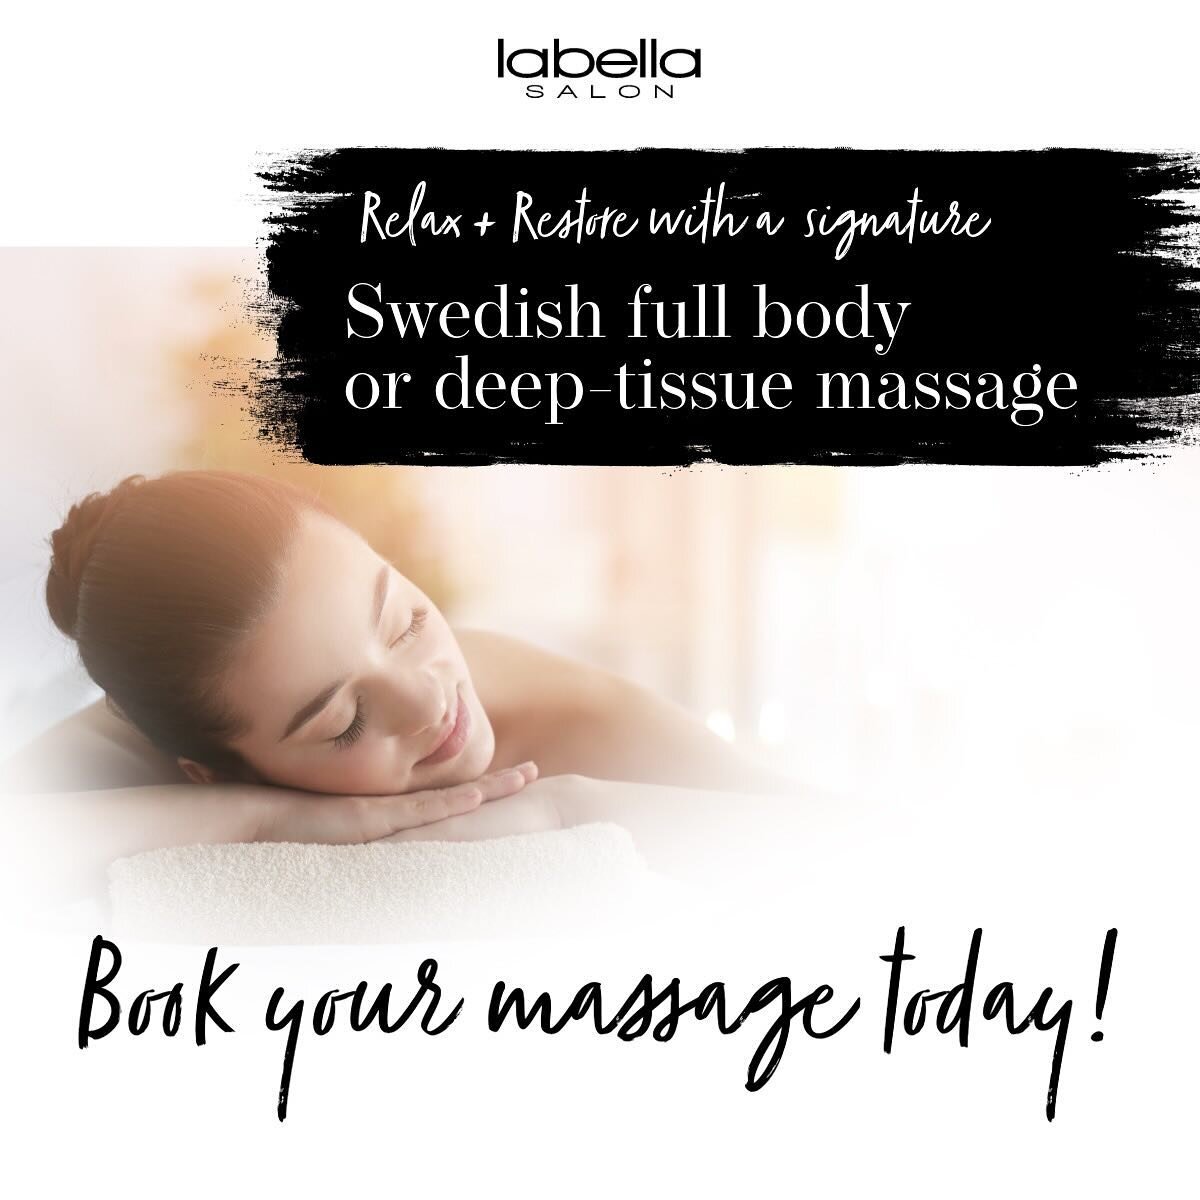 We will be accepting massage appointments starting March 26. 

Swipe to see available options&hellip;

☎️ 509-332-3600 to schedule with Heidi or Anita 
✨Come be our guest✨